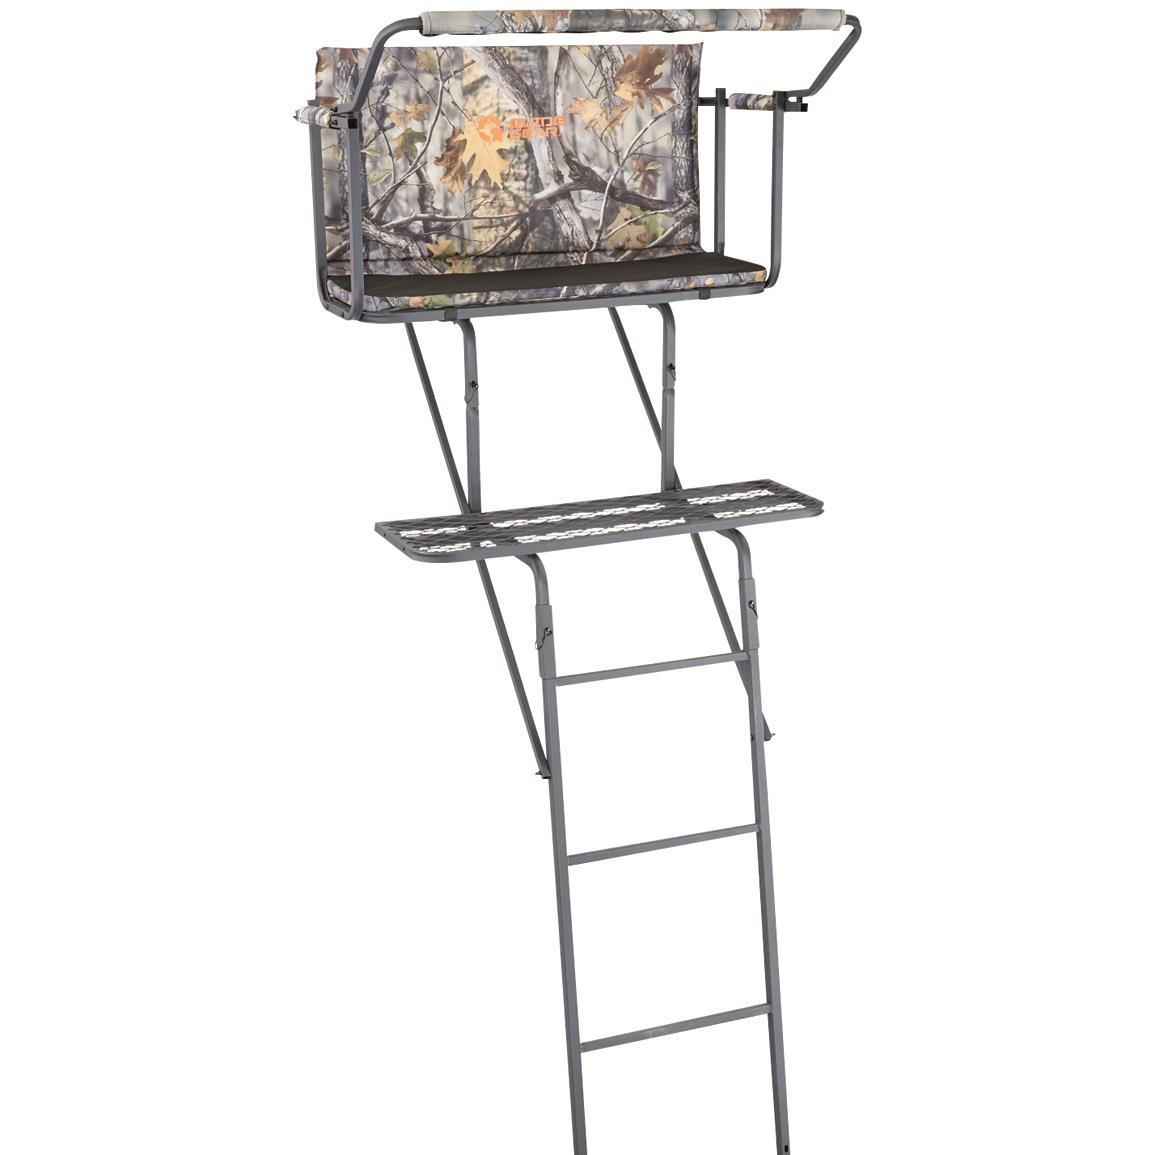 Guide Gear 16.5' 2-Man Ladder Tree Stand